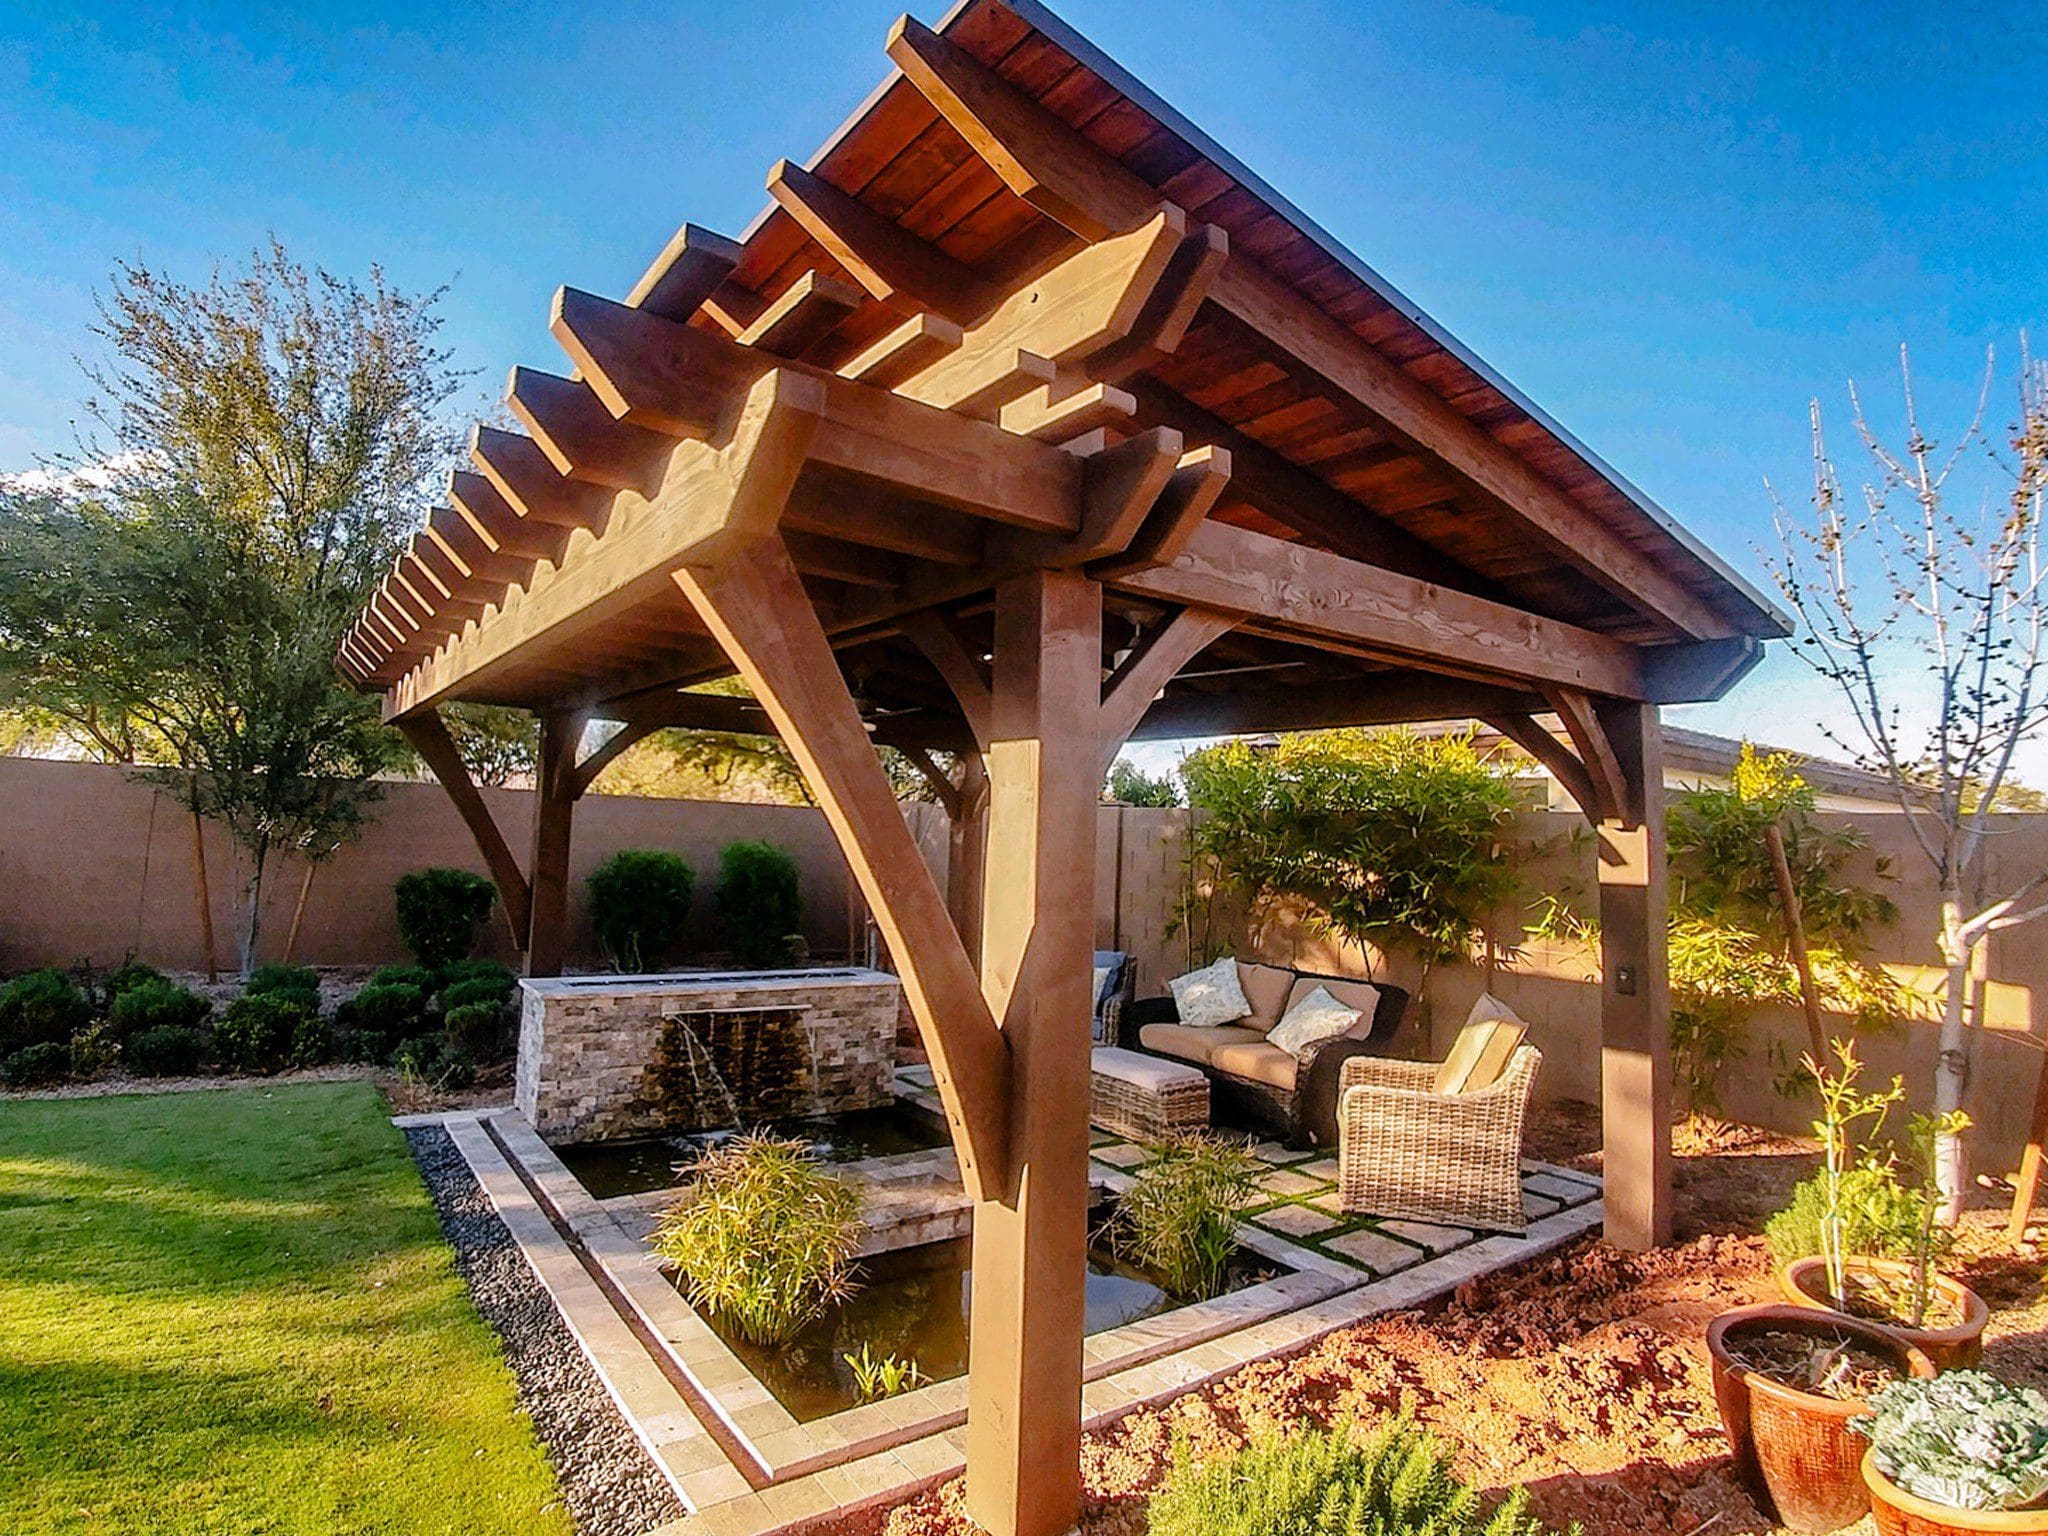 Zen Den Combines Architectural Appeal & Outdoor Shade- Notched